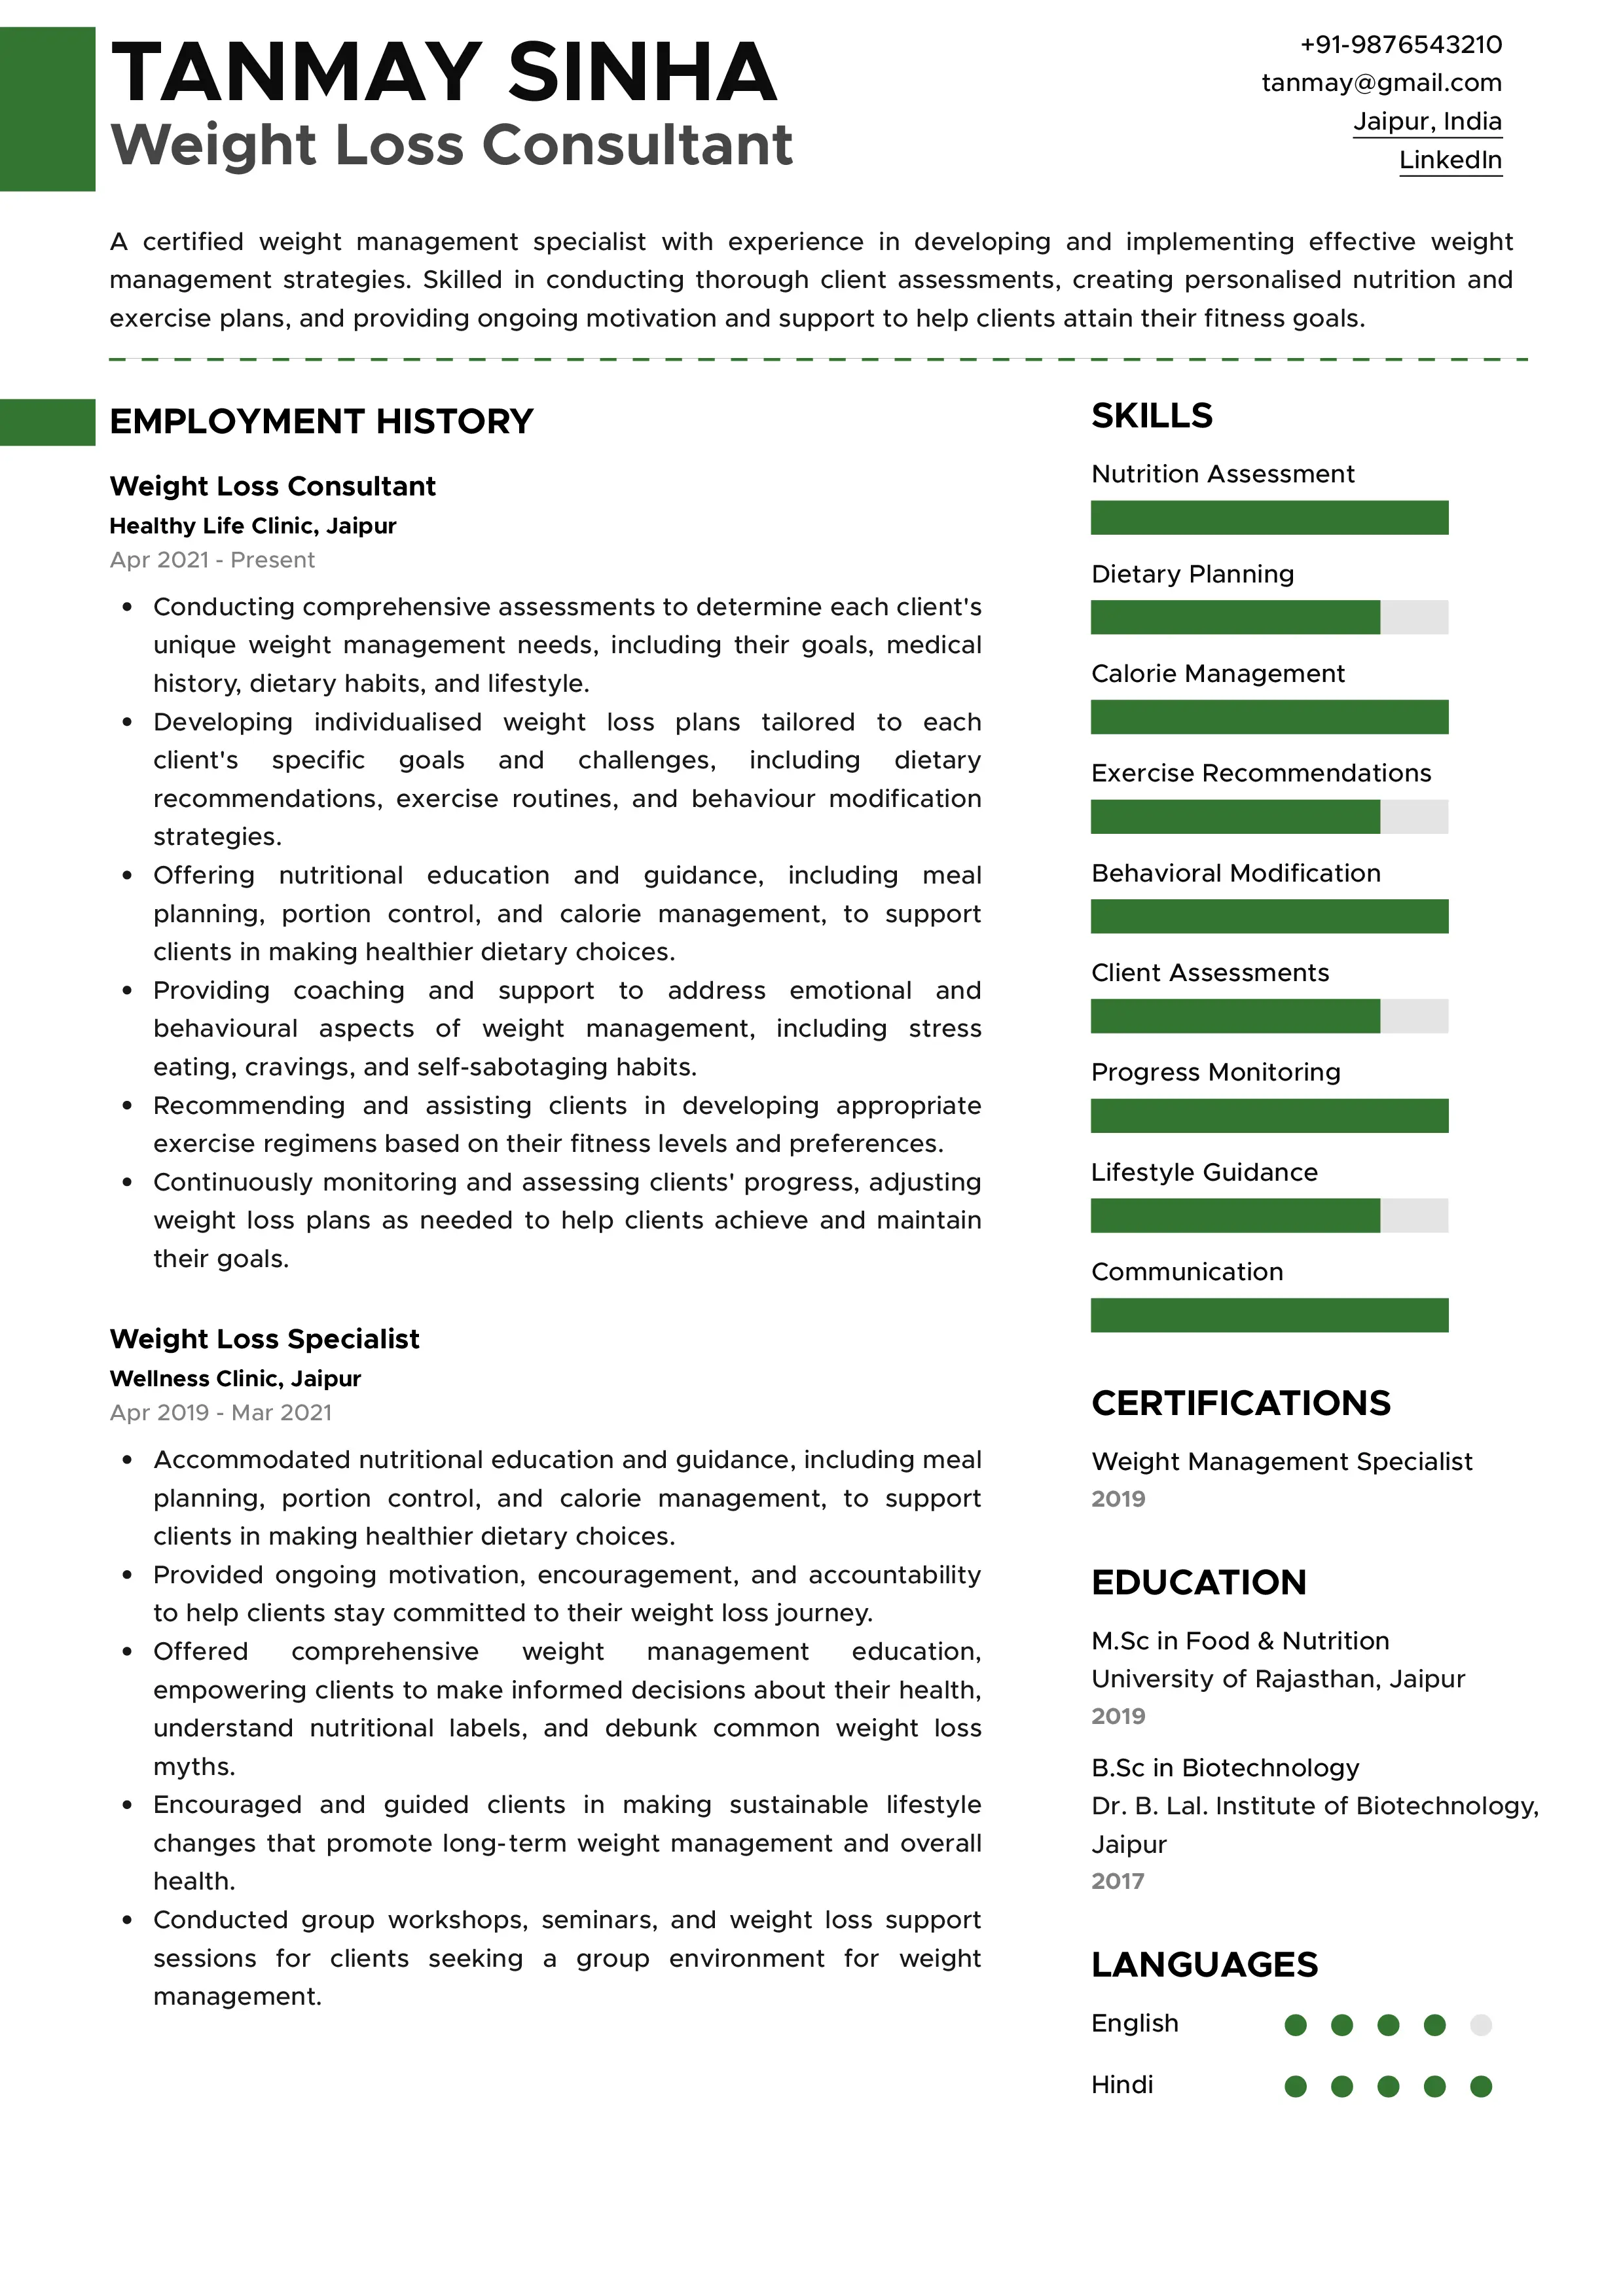 Sample Resume of Weight Loss Consultant | Free Resume Templates & Samples on Resumod.co